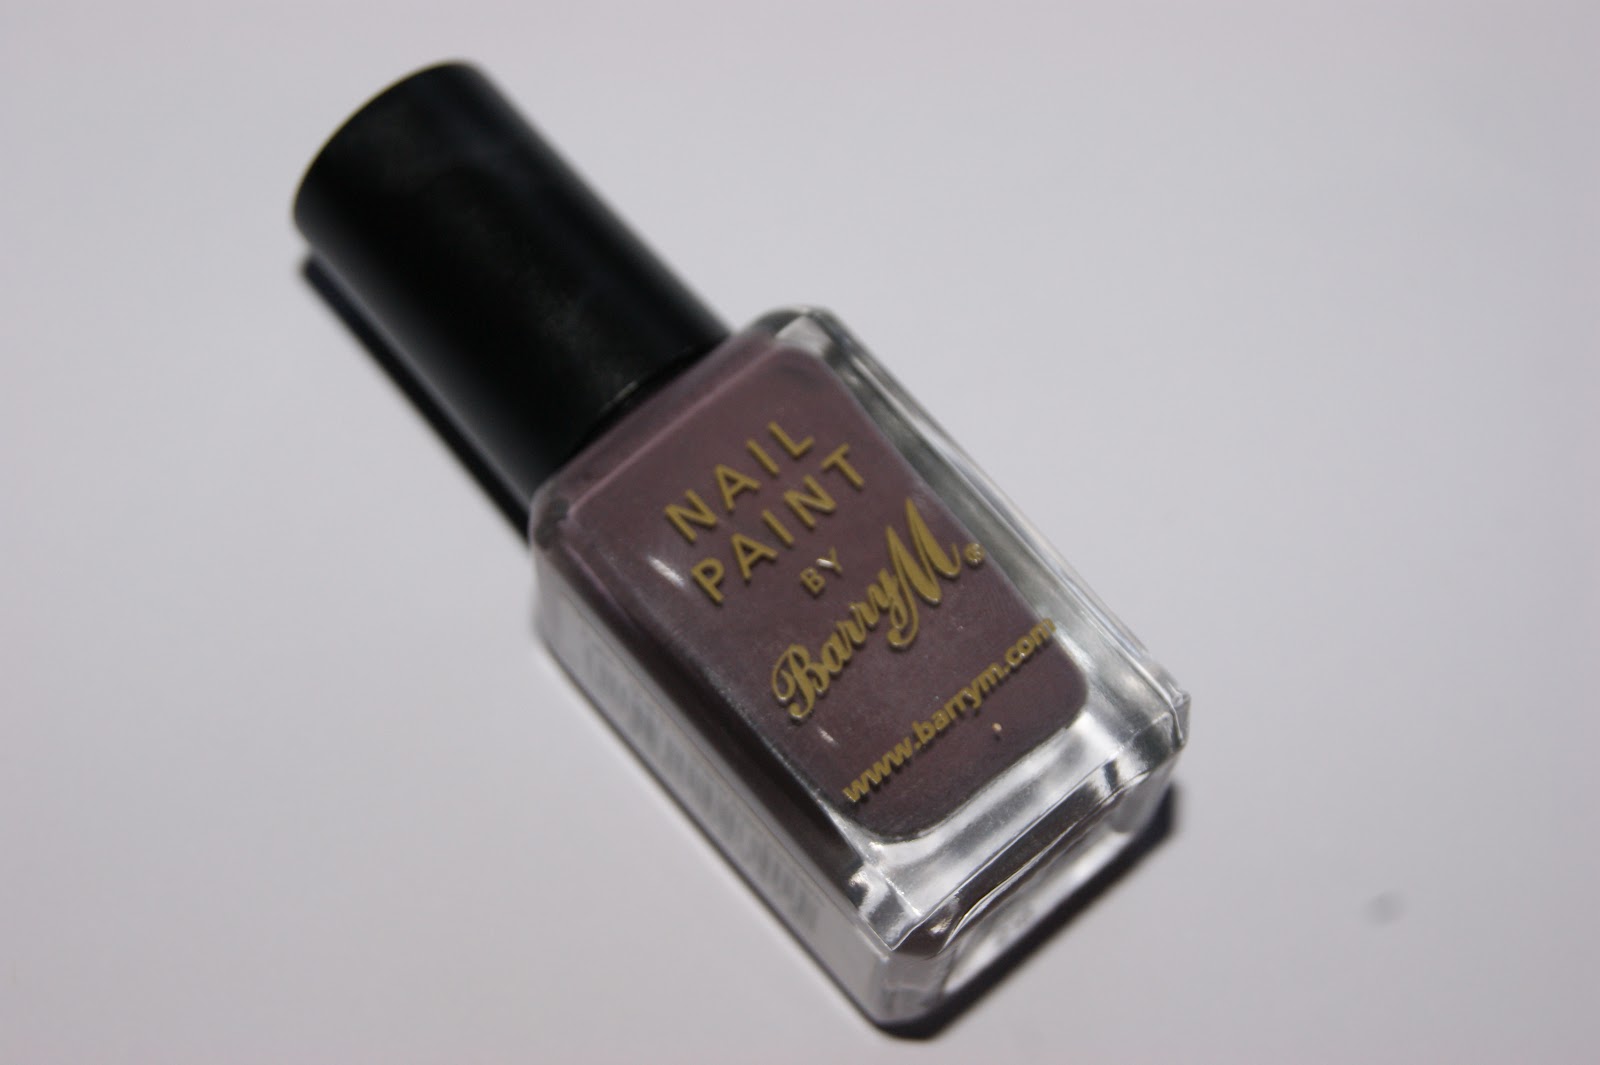 Barry M Nail Paint in Cappuccino (341) - Review